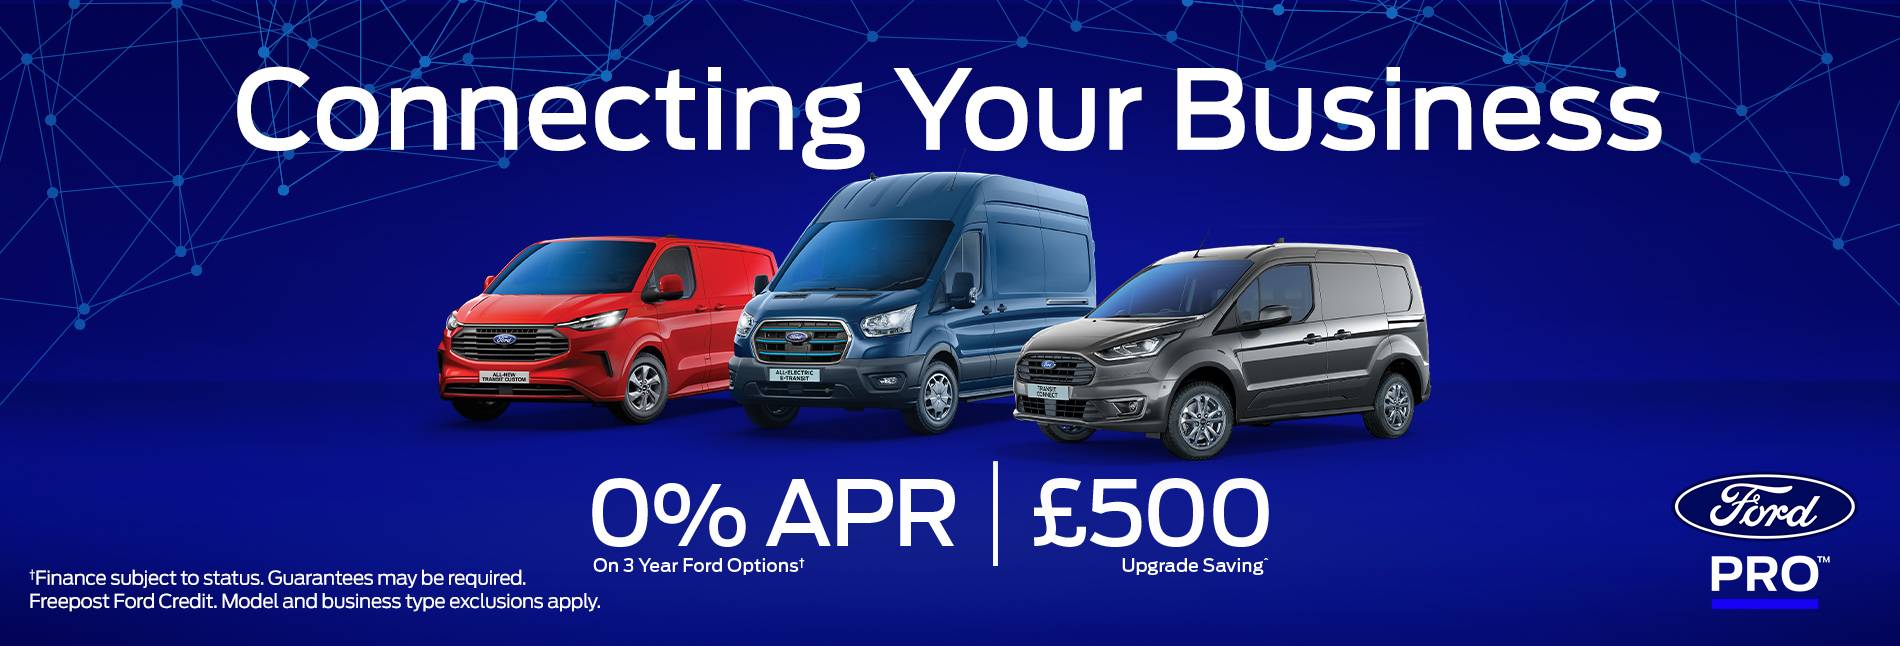 Connecting Your Business Ford Offer